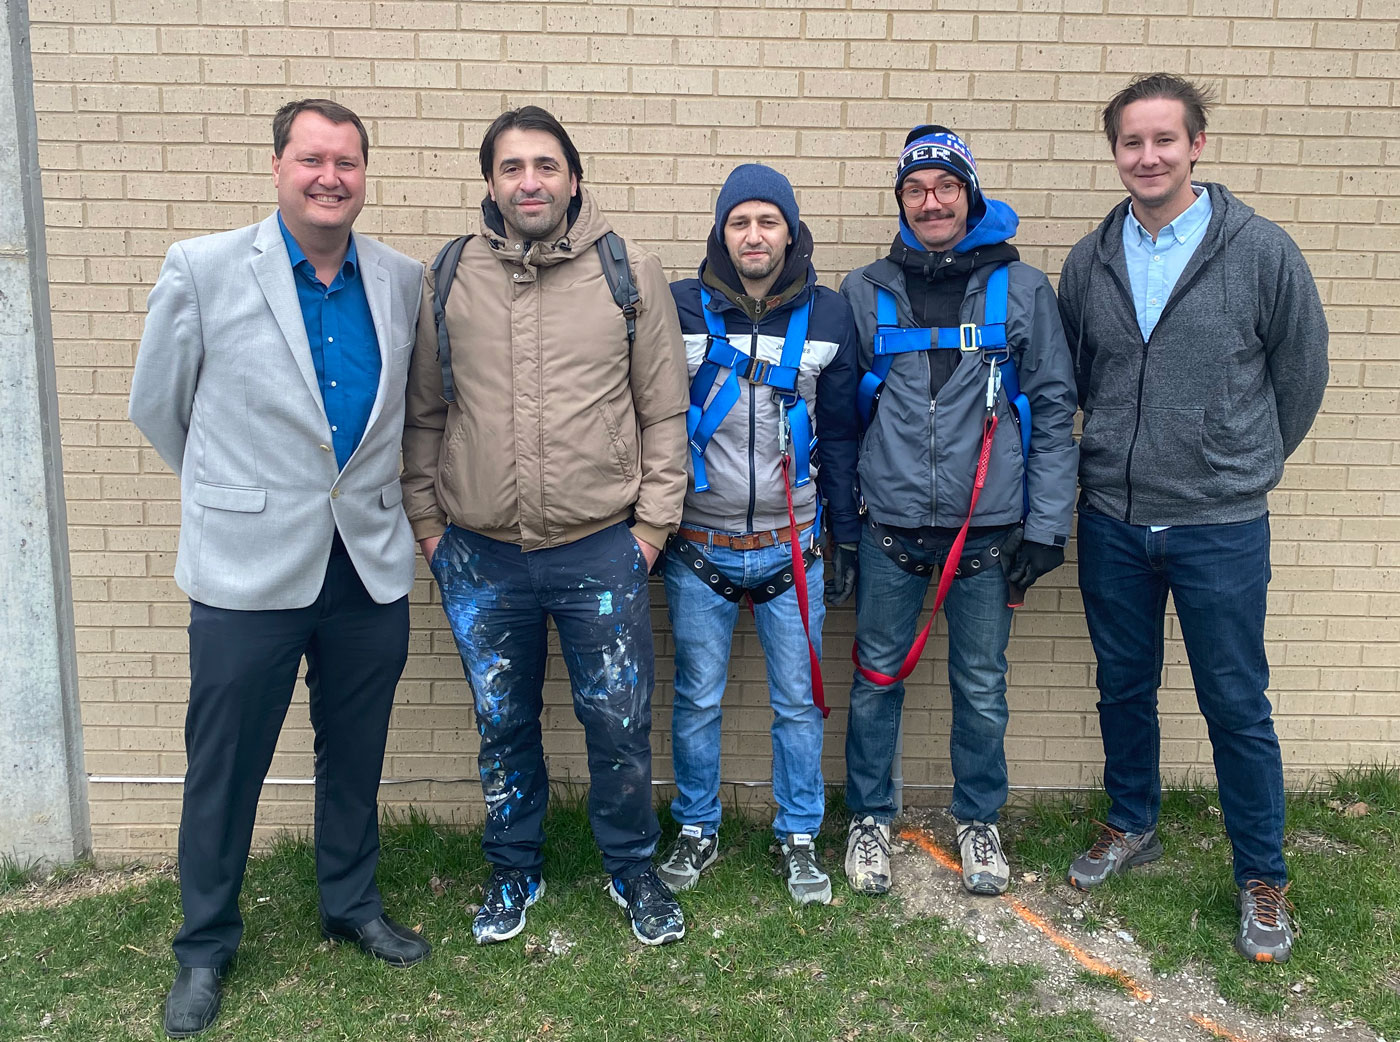 L to R: Jesse Thoeming (executive director, Downtown Cedar Rapids); NEVERCREW Artists Christian Rebechhi, Pablo Togni, and Assistant Alessandro De Bon; and Nick Ludwig (co-chair, Murals & More)